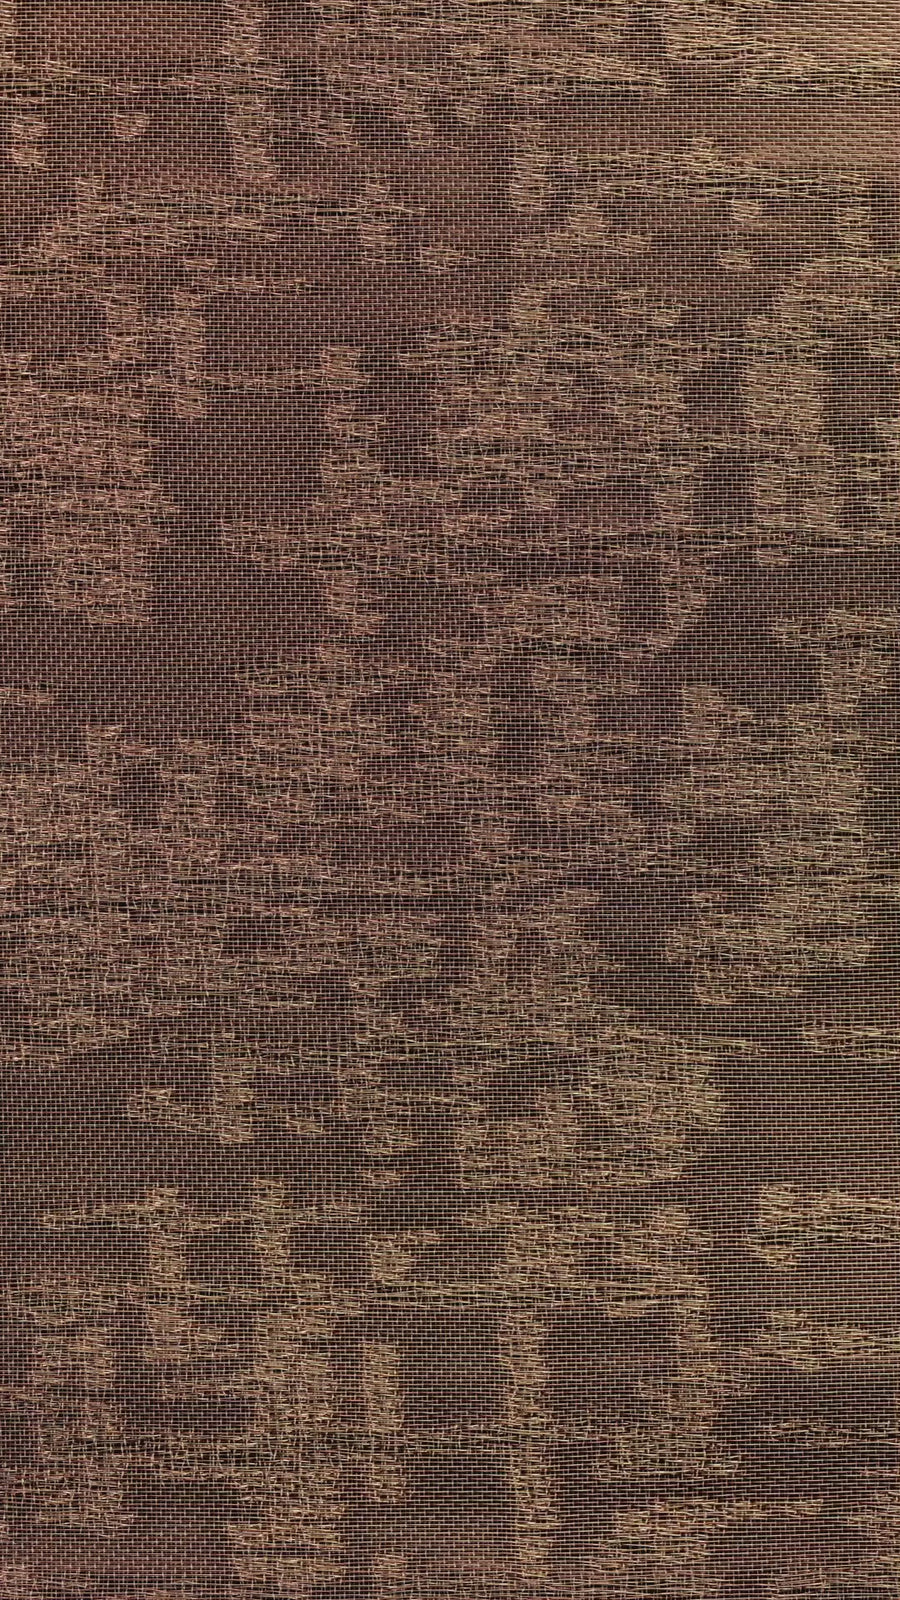 LCD Metal Fabric Tweed Collection